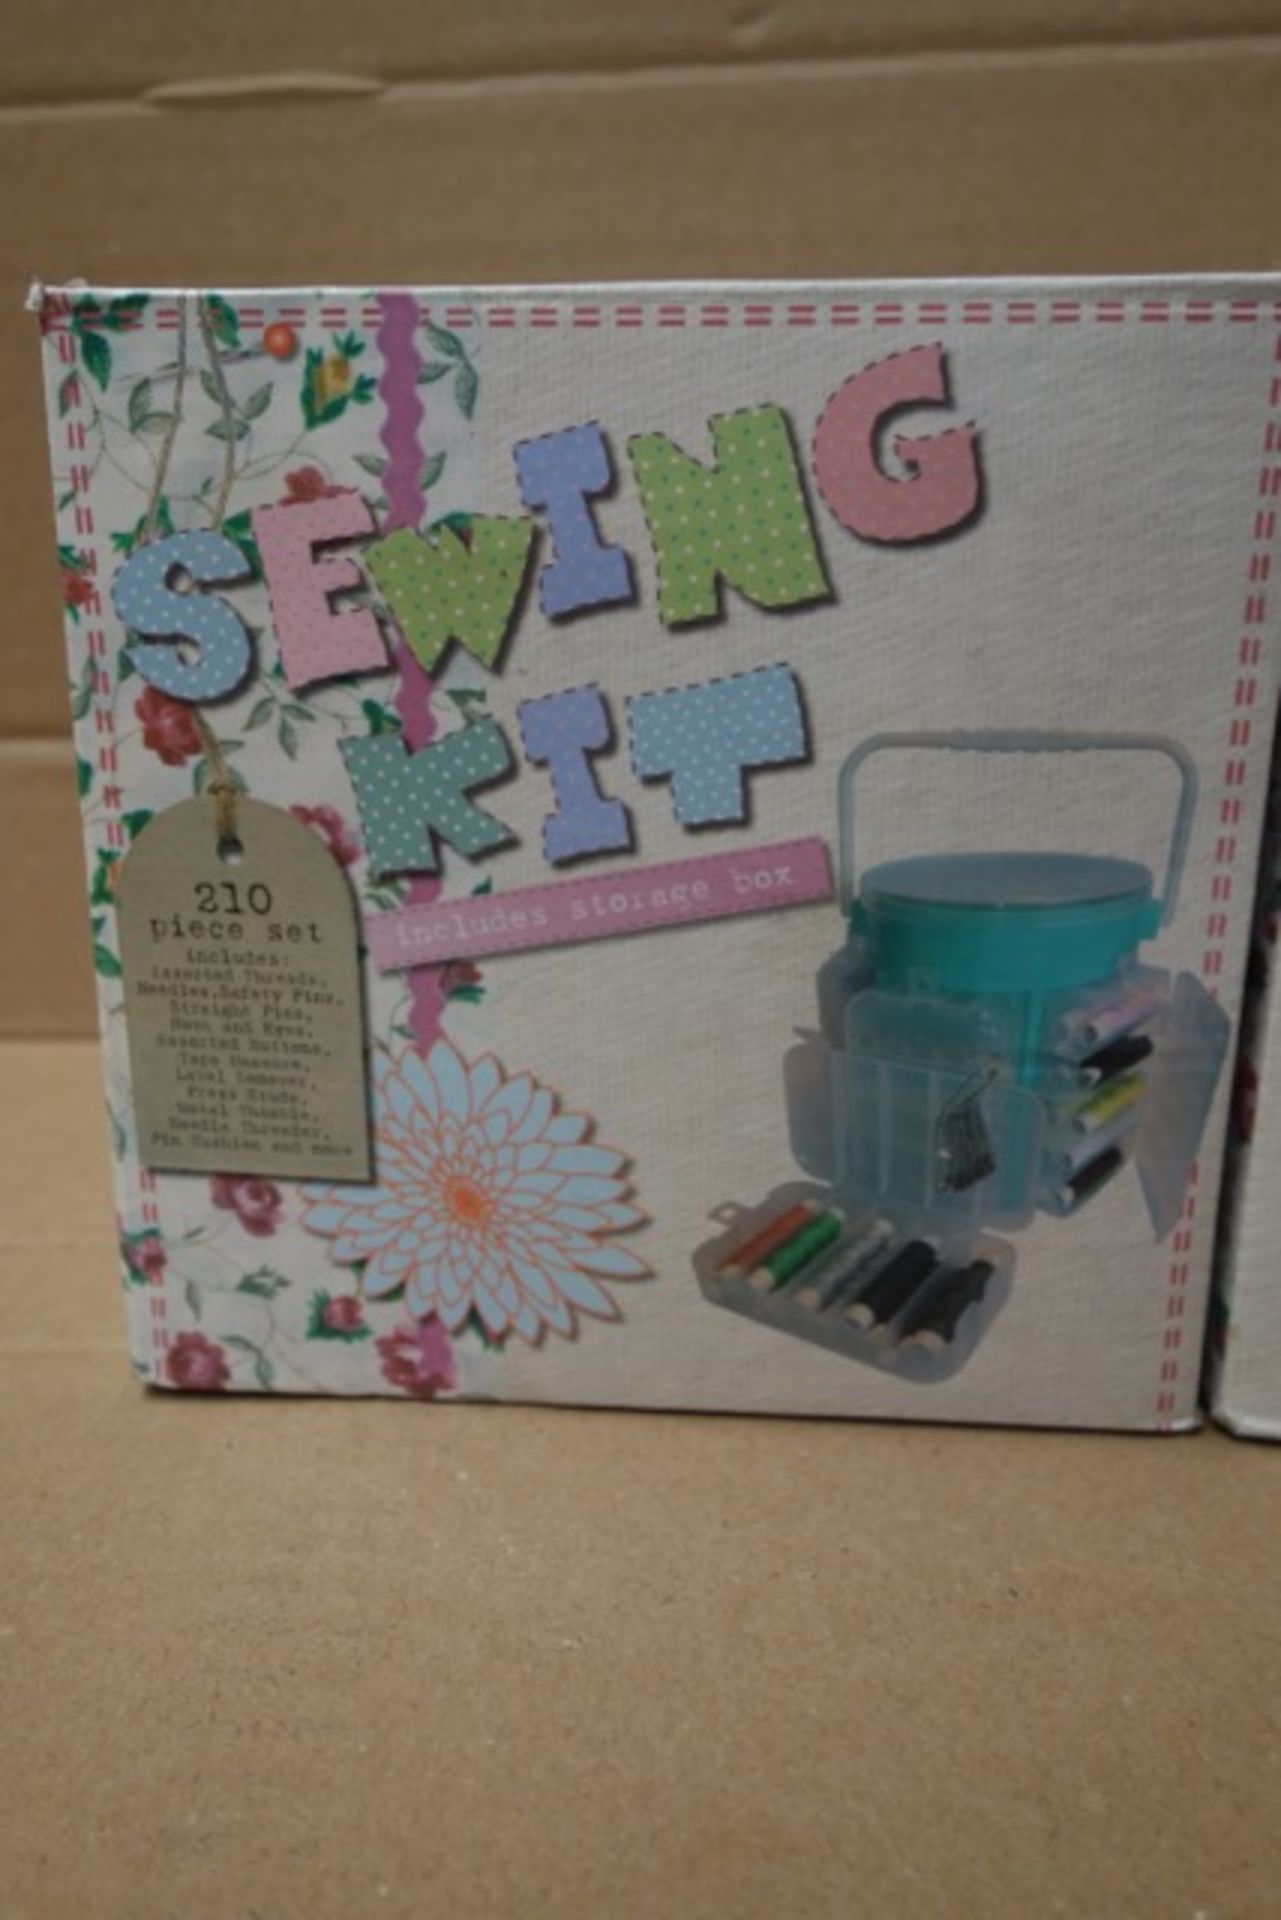 36 x 210 Piece Sewing Kits. Each Kit Includes: storage box, assorted threads, needles, safety - Image 2 of 3